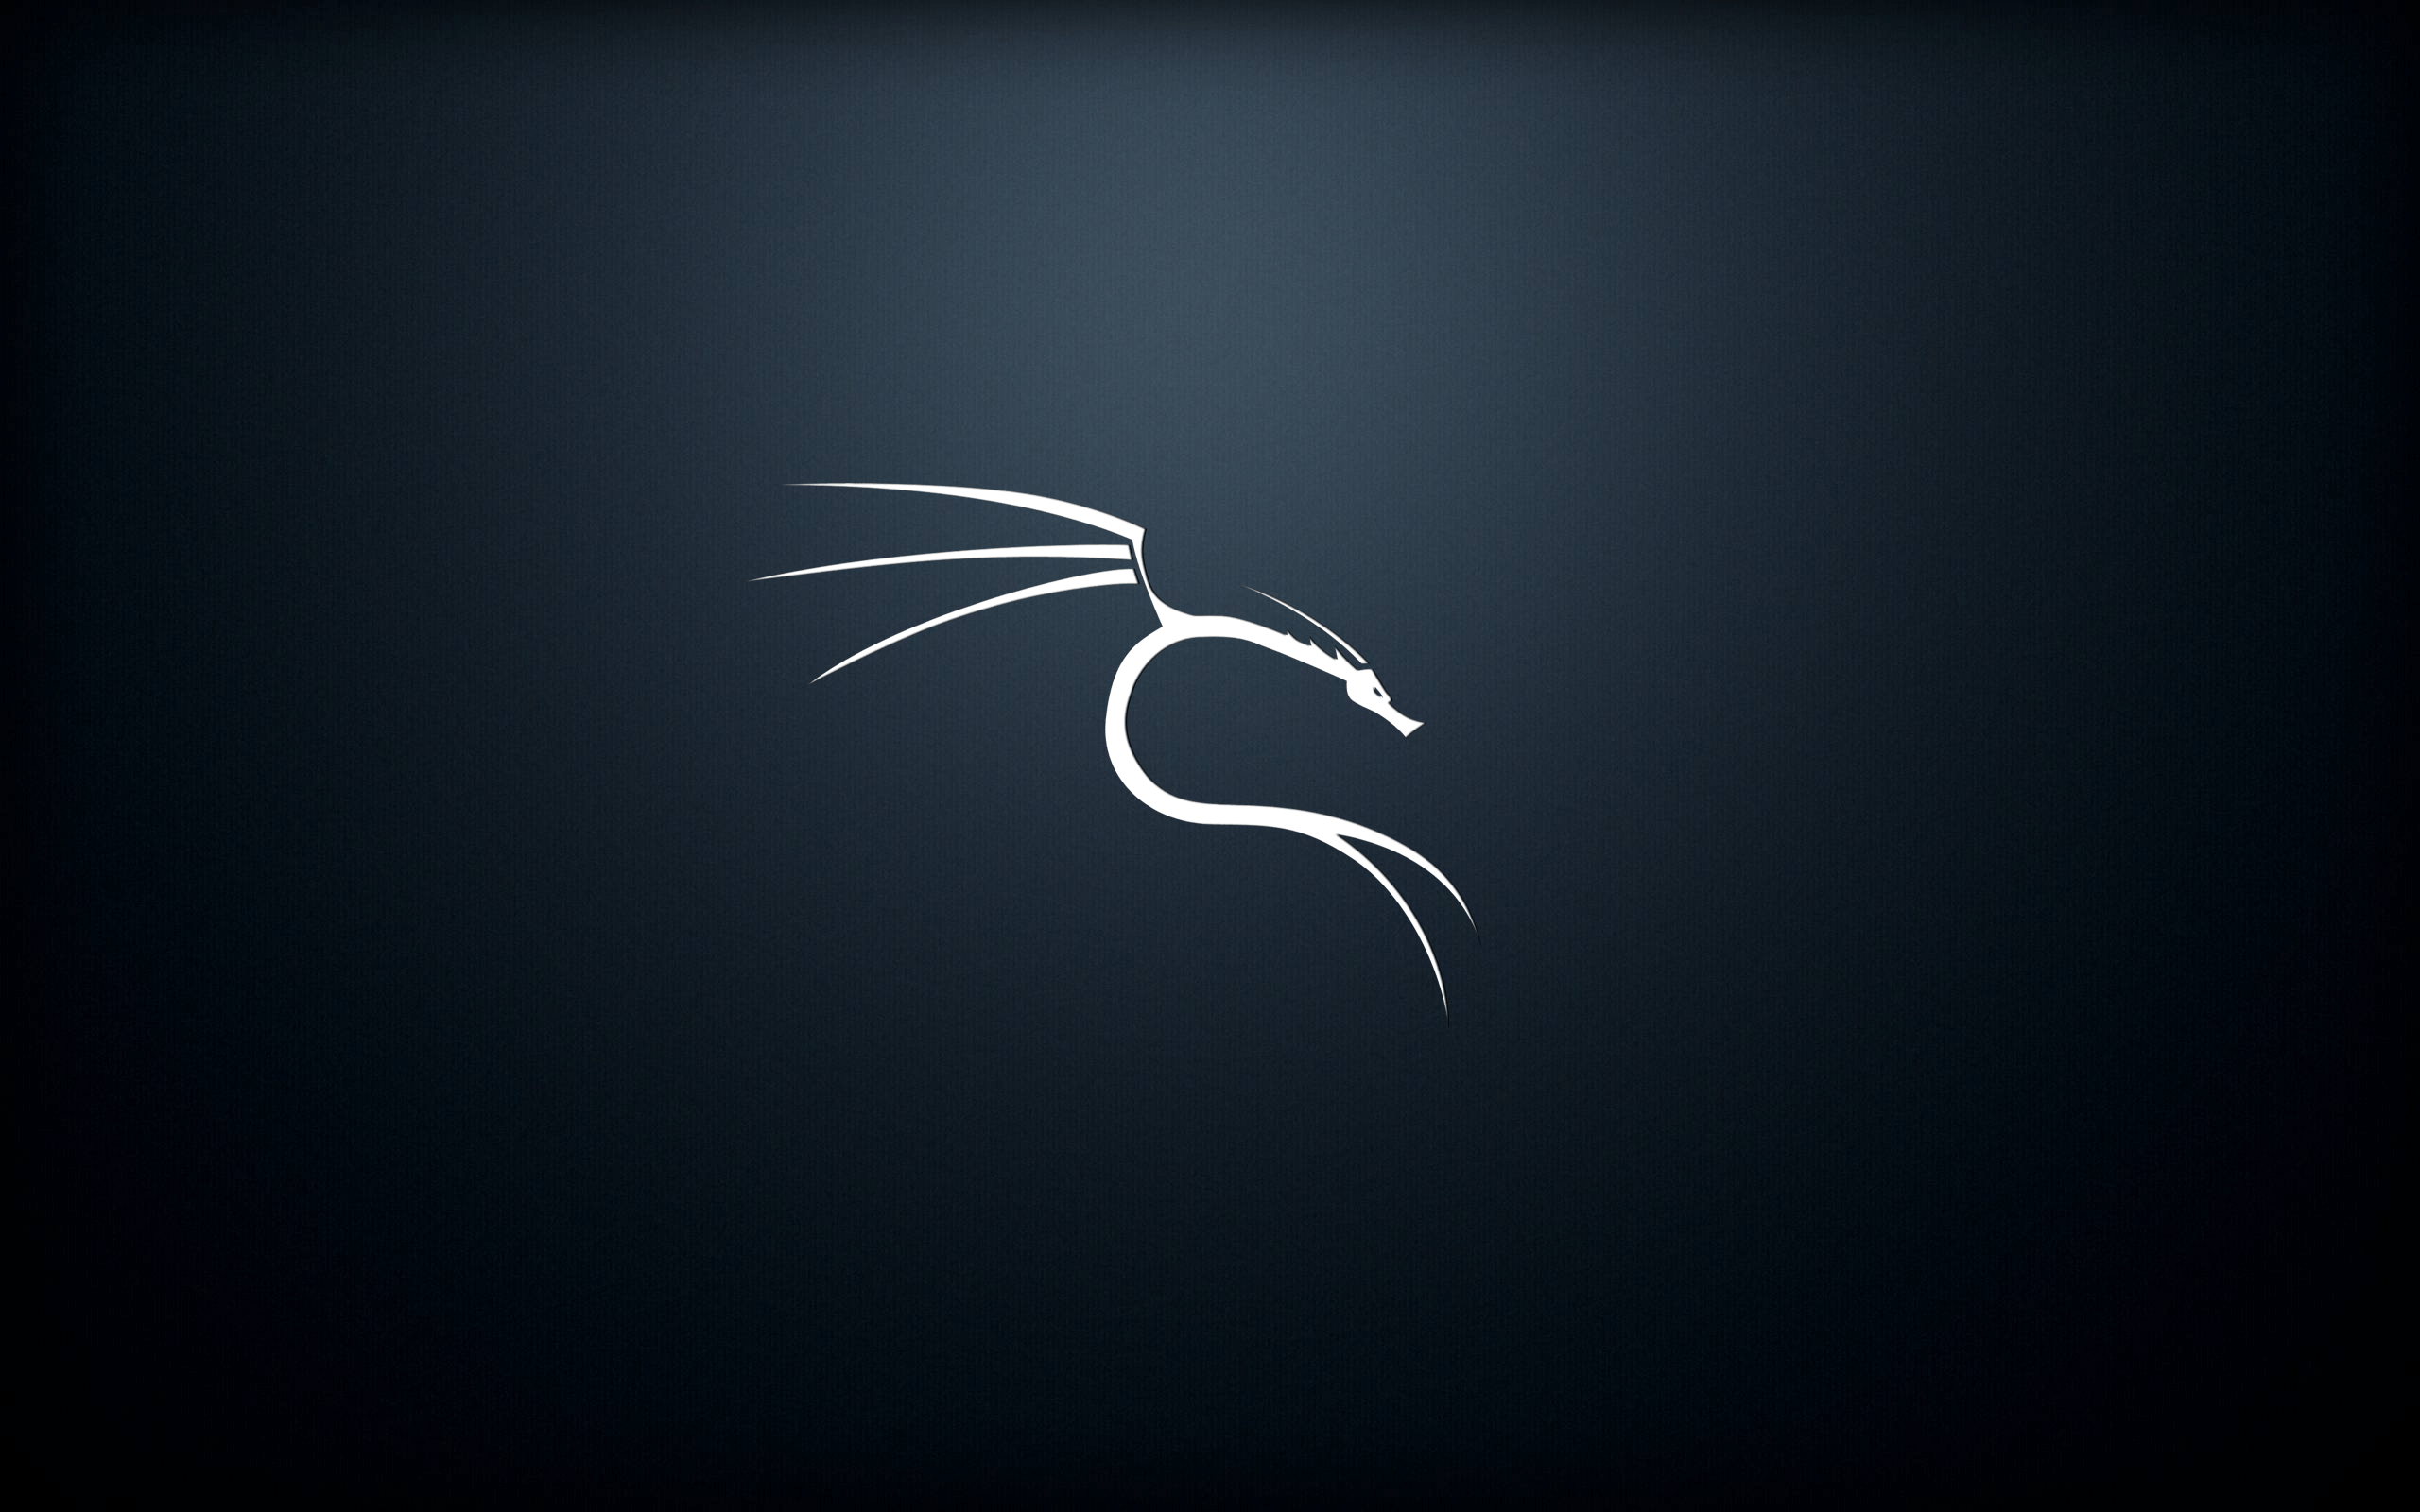 download kali linux for pc